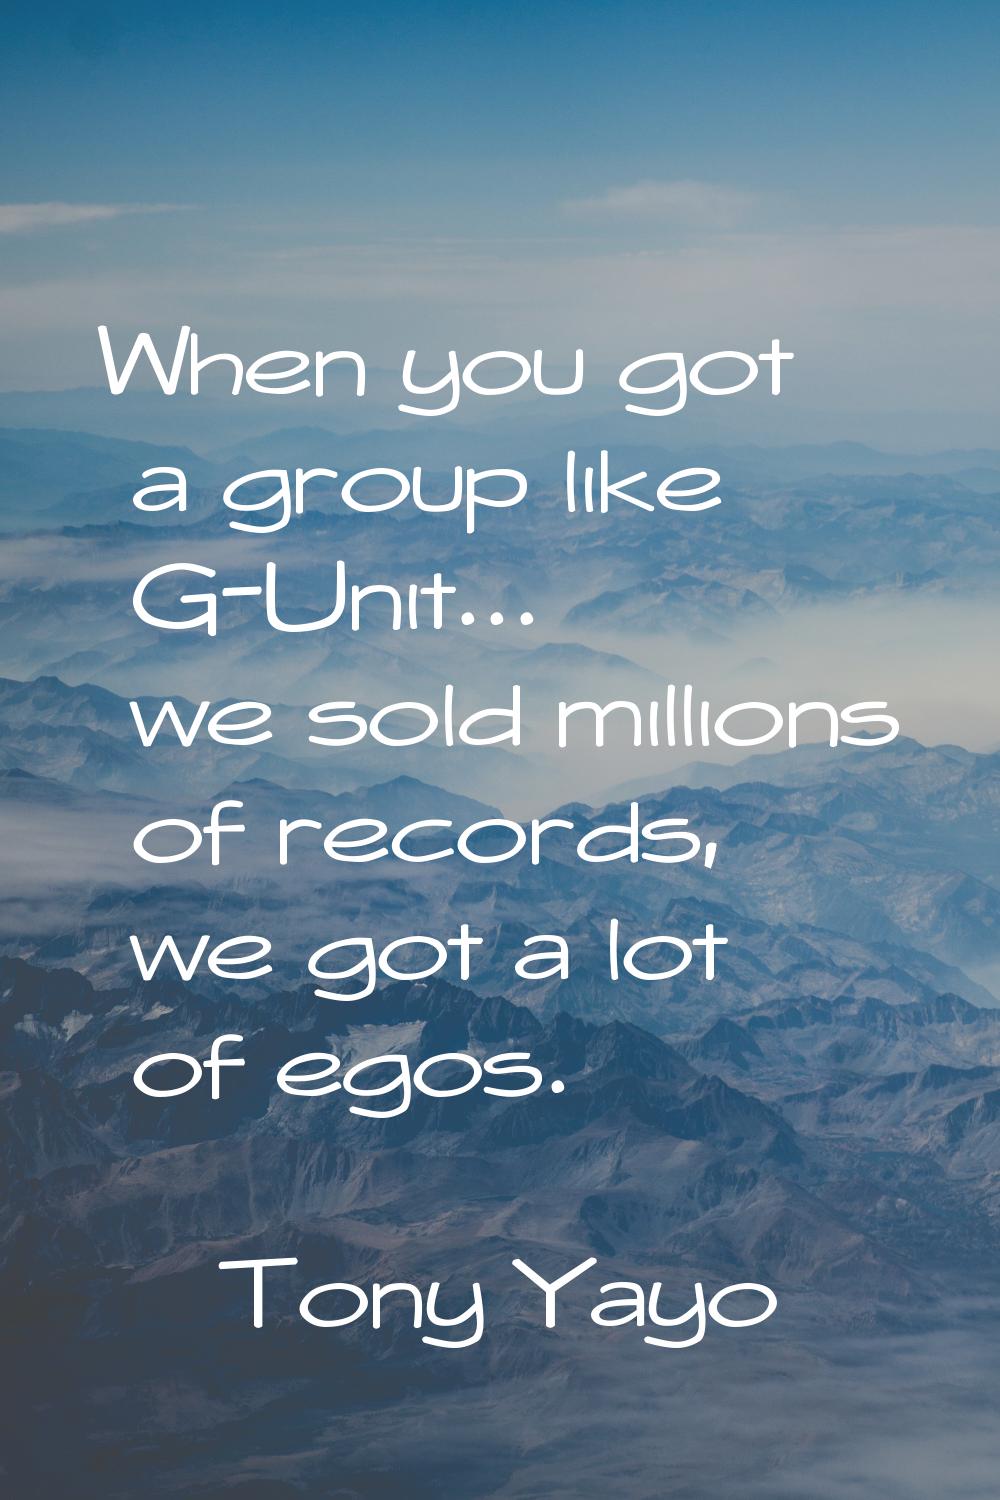 When you got a group like G-Unit... we sold millions of records, we got a lot of egos.